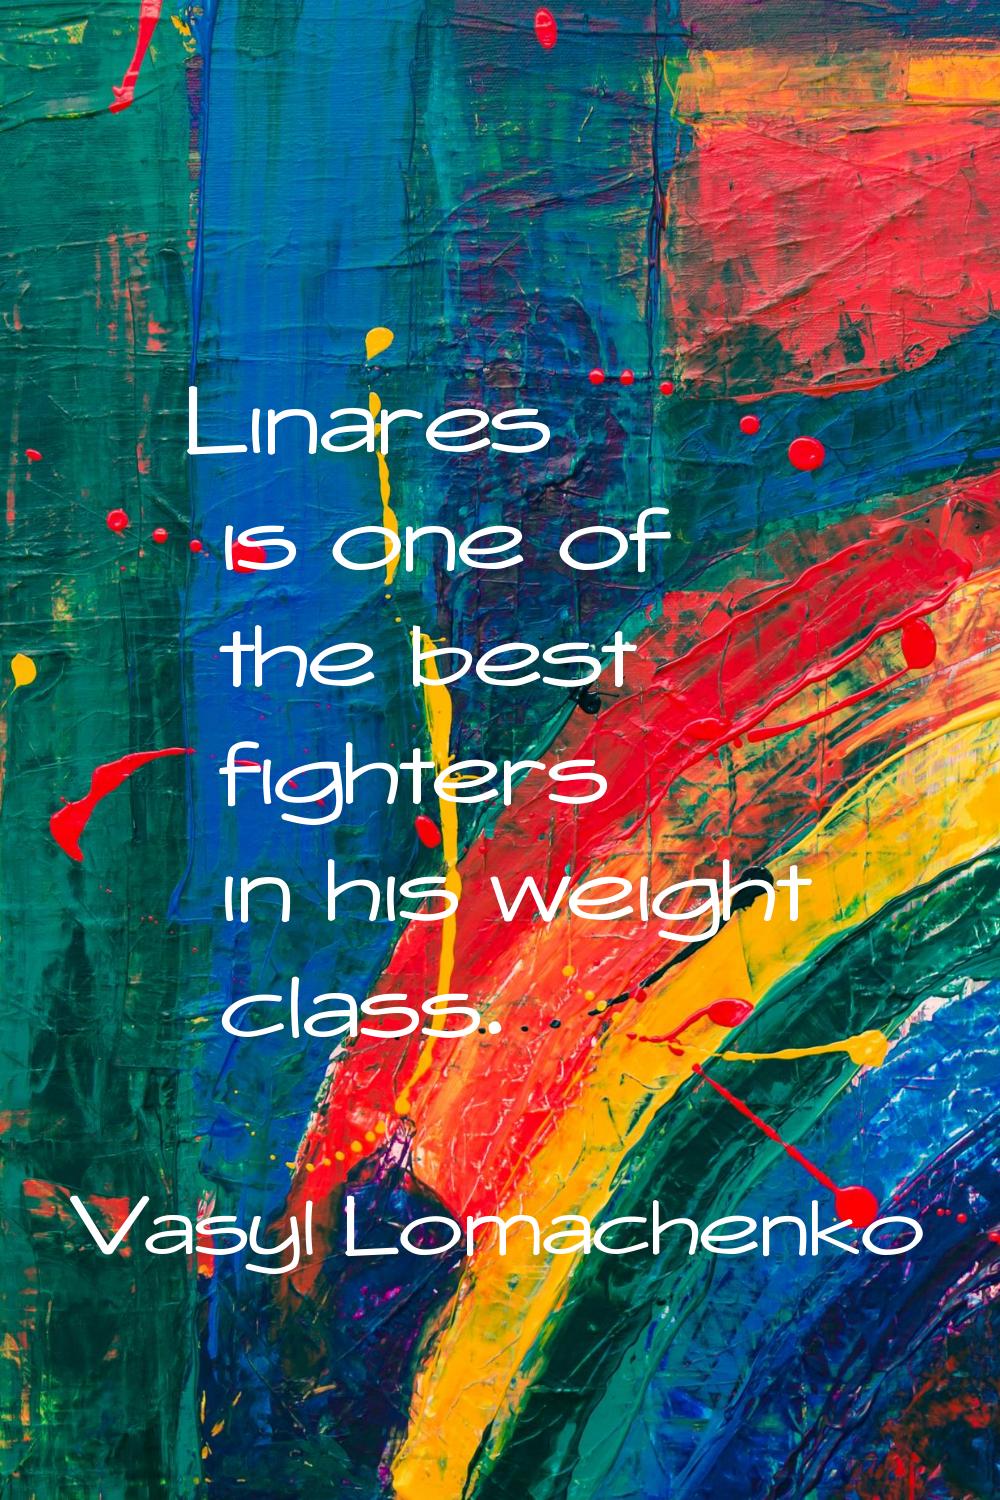 Linares is one of the best fighters in his weight class.